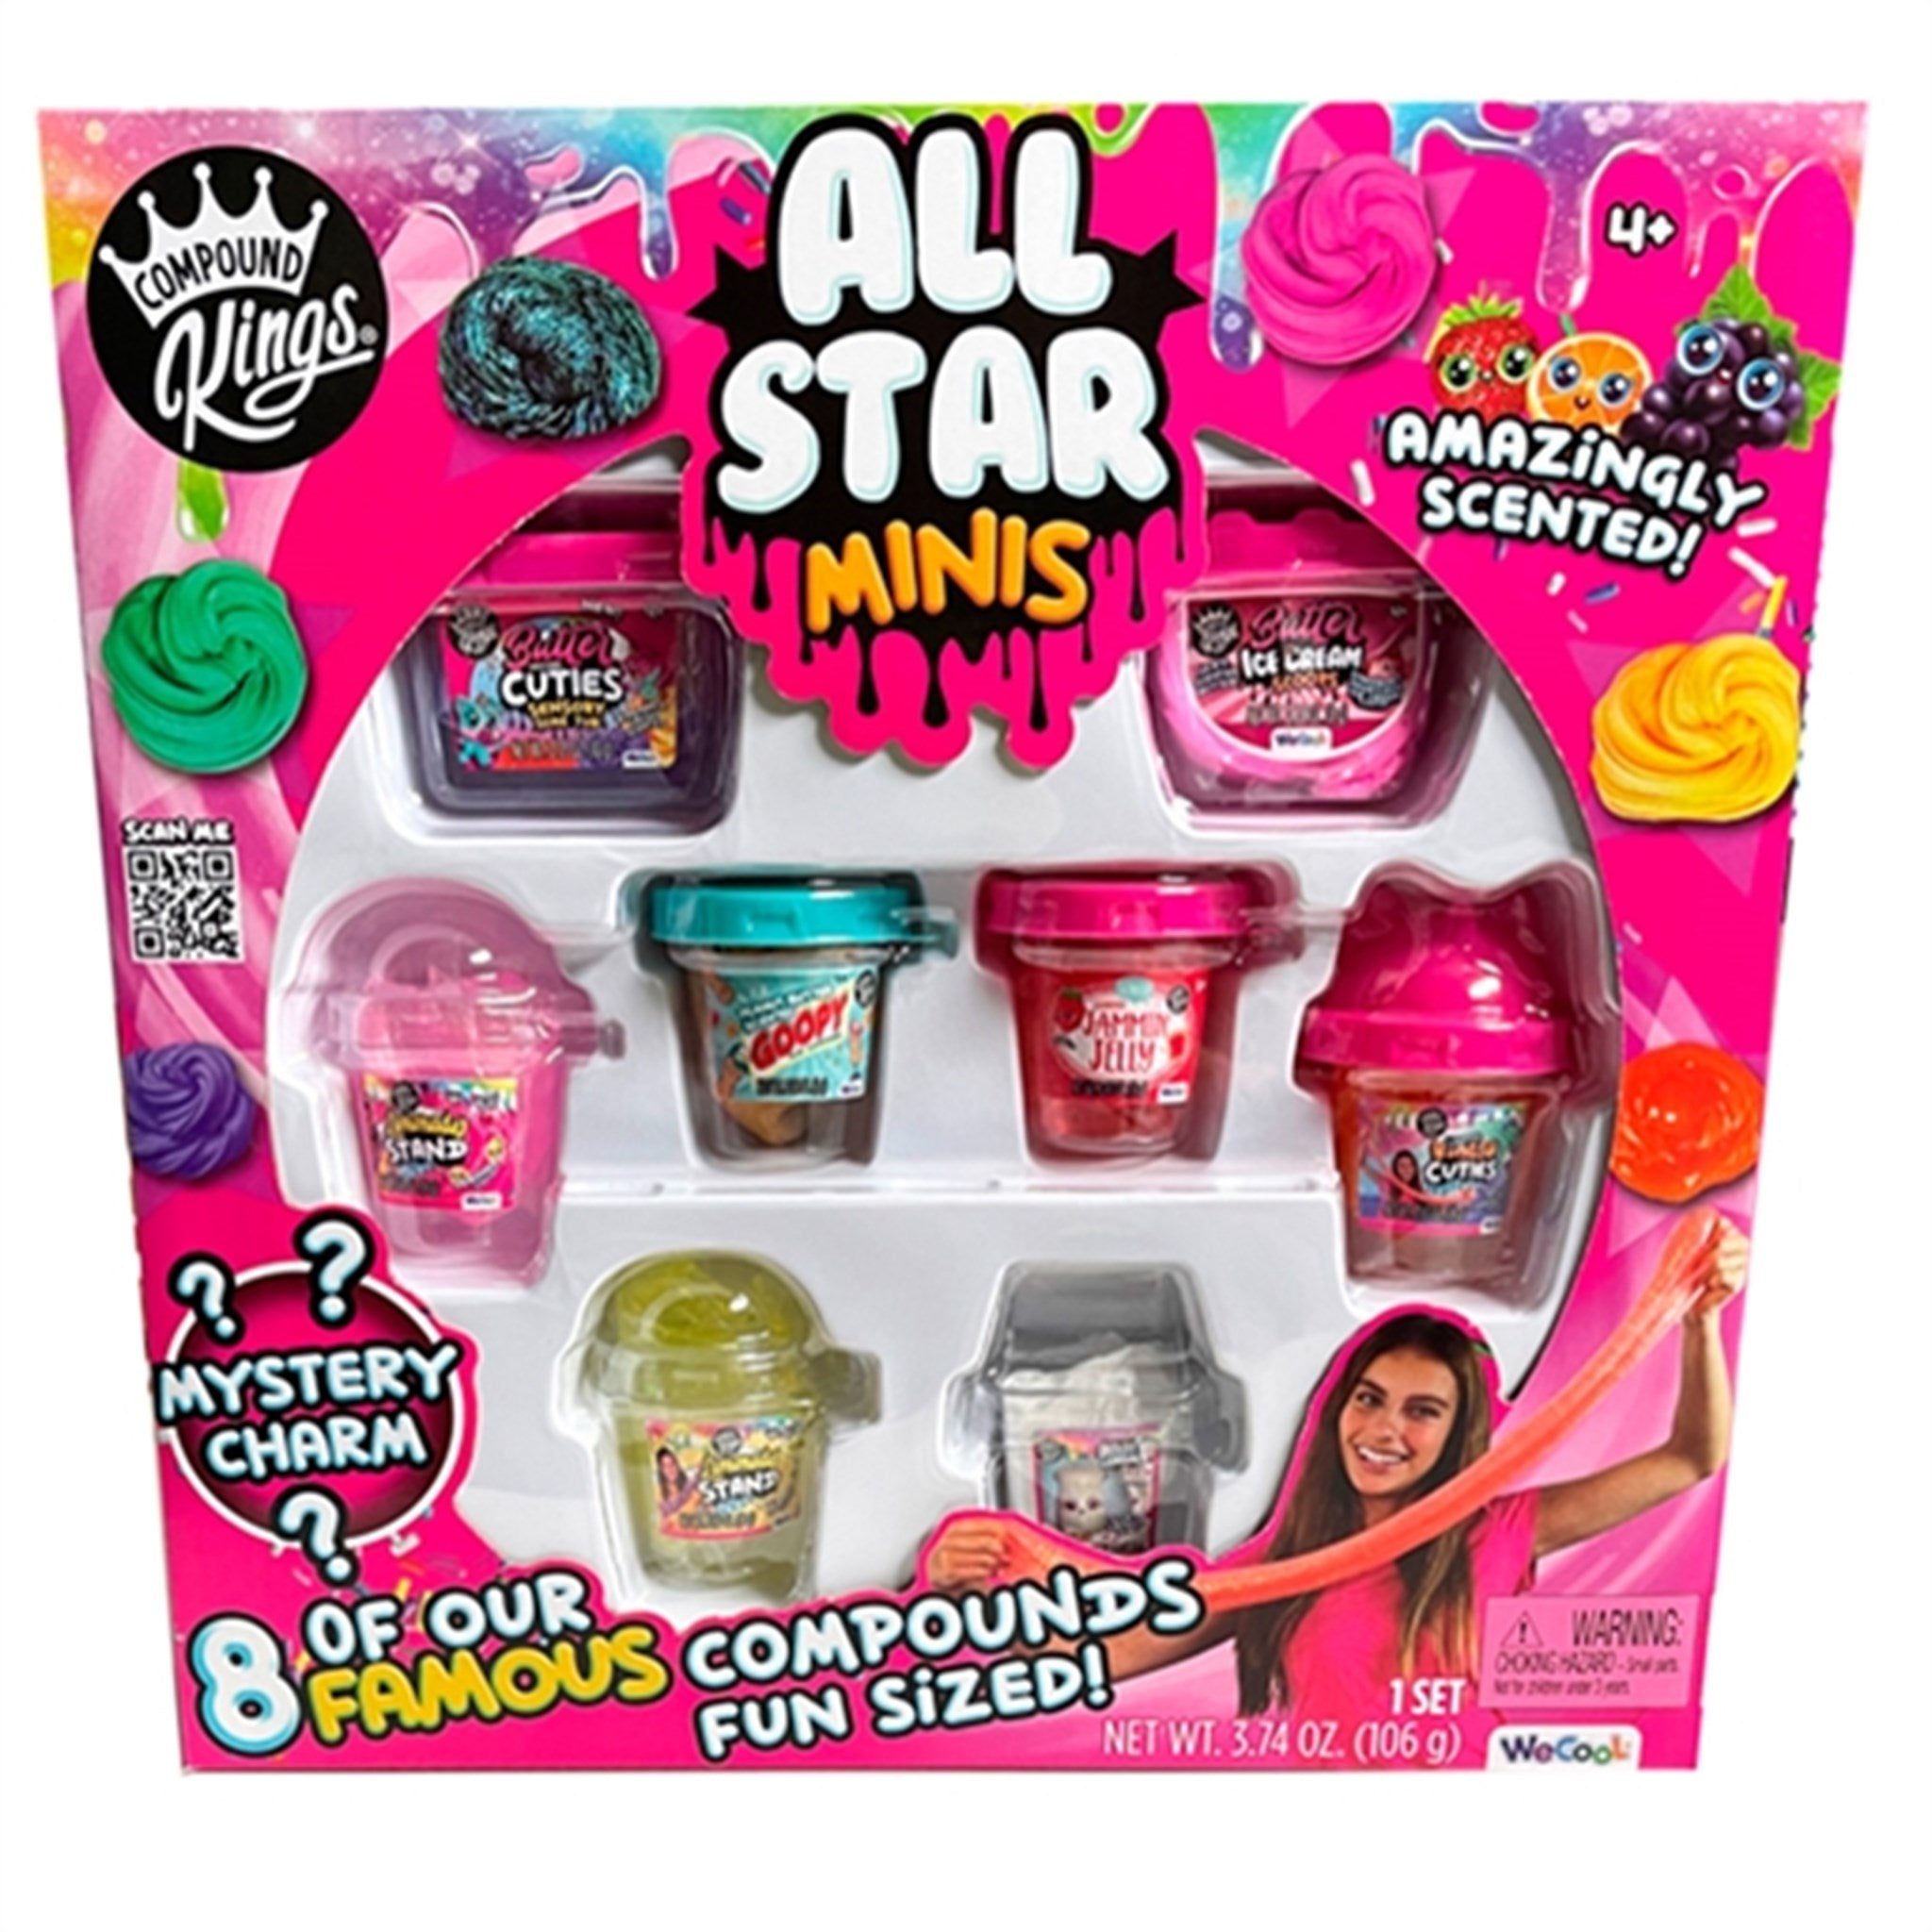 Compound Kings All Star Minis 8-pack